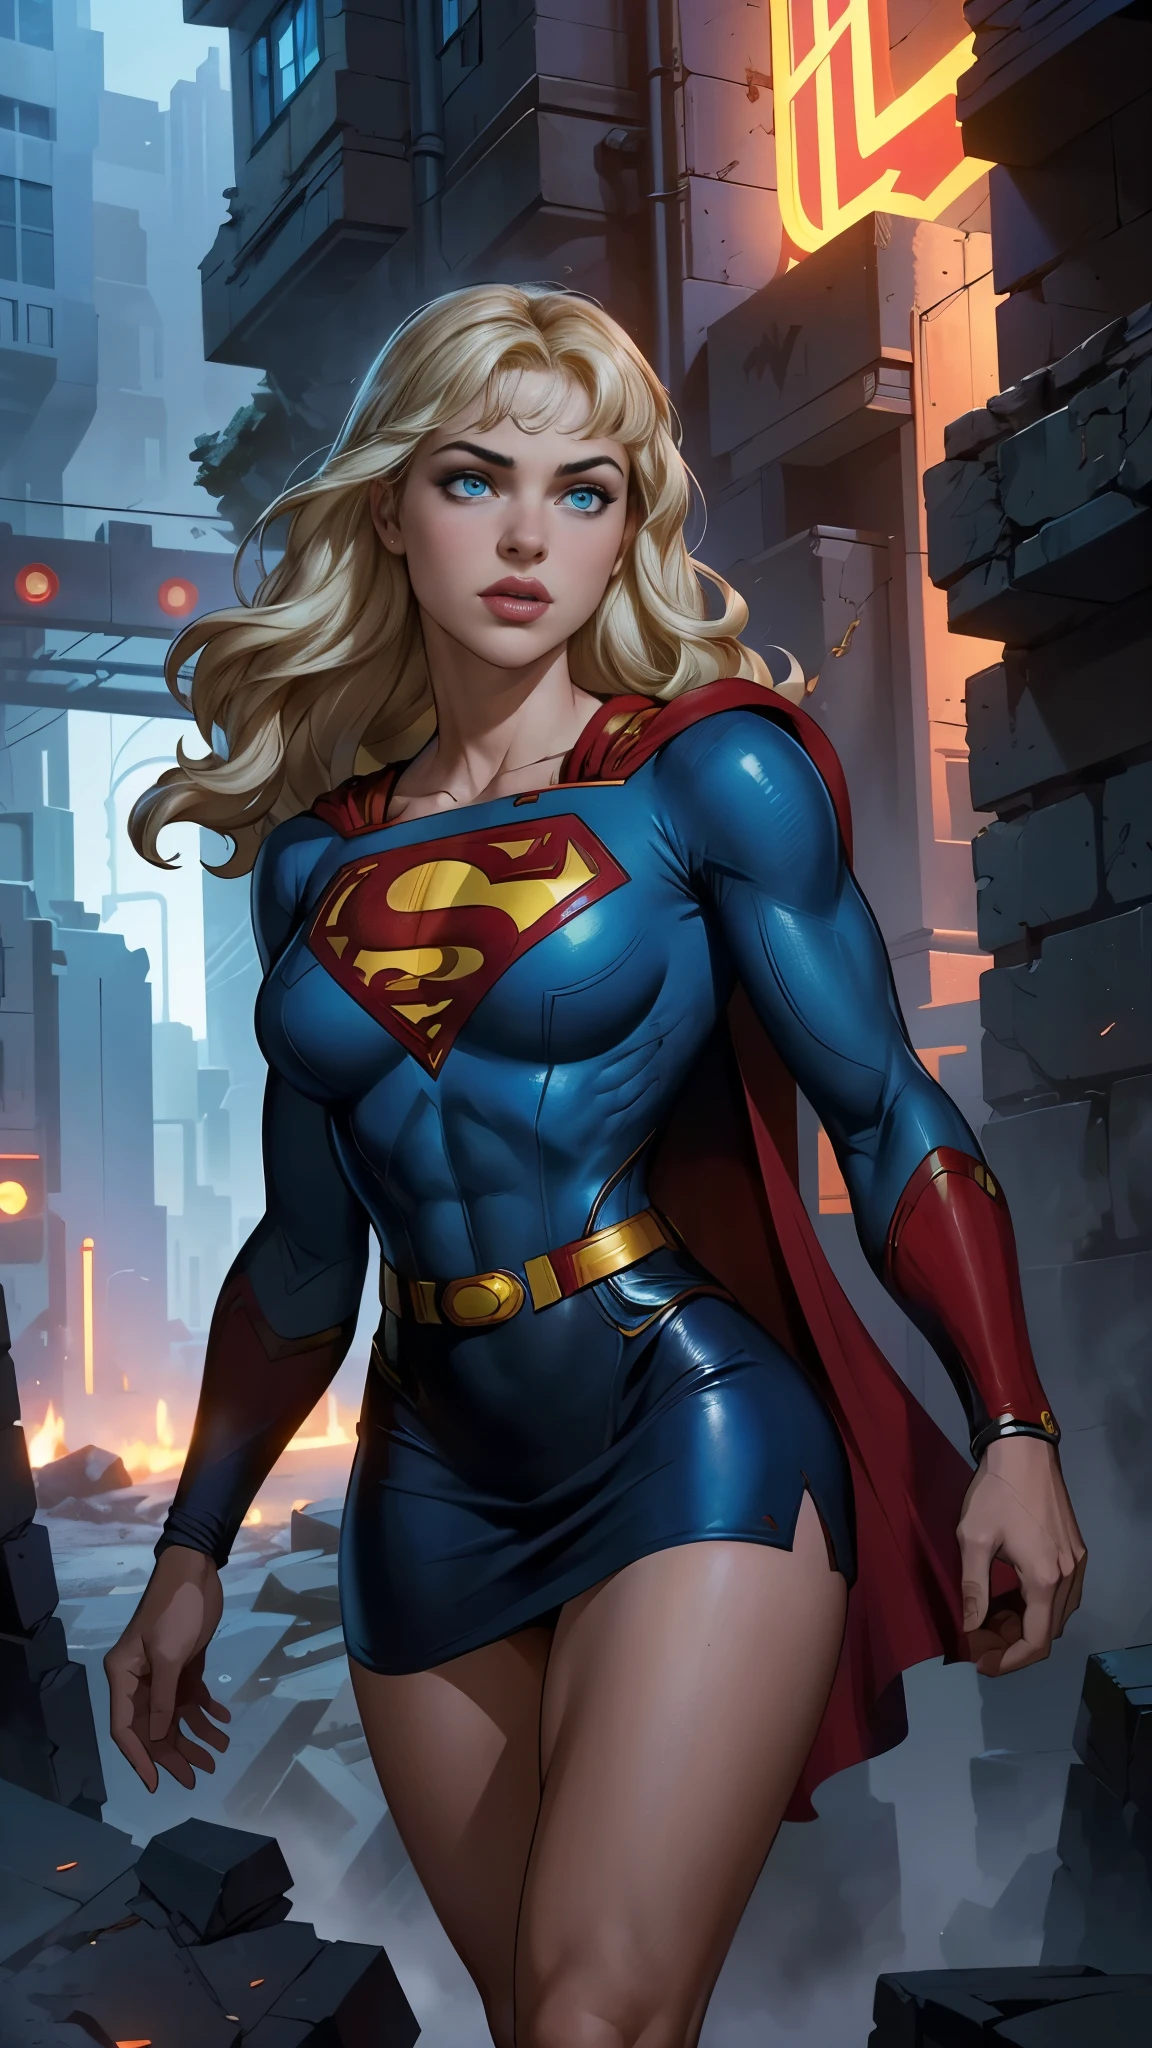 8K, Ultra HD, super details, high quality, high resolution. The heroine Supergirl looks beautiful in a full-length photo, her body is sculptural, her long wavy blonde hair is radiant in a perfect combination with her white skin, her bright blonde eyes mesmerize everyone. She is wearing her heroine outfit, a red skirt with a yellow belt, a very tight blue t-shirt with a big red S on the chest, Elta also wears a red cape and red boots. she looks very sexy drawing attention to her big breasts and thick legs as she flies through the sky.,(Fondo de ruinas de mazmorra en ruinas cyberpunk :1.4 ), (supergils superman :1.4), (vestuario white traje :1.4), (Detalles de la cara: 1.5, ojos azules brillantes, hermoso rostro, ojos bonitos, Contorno del iris, labios delgados: 1.5, Thin, sharp pale eyebrows, Long, dark eyelashes, double tabs),(dynamic cowboy pose), score_9, score_8_up, score_7_up, score_6_up, rating_explicit, 1girl, ((18YO:1.2)), Adult, full lips, big clear eyes, light blue eyes, ((blond hair:1)), (long wavy hair: 1.2),(capa de superman:1.4) 